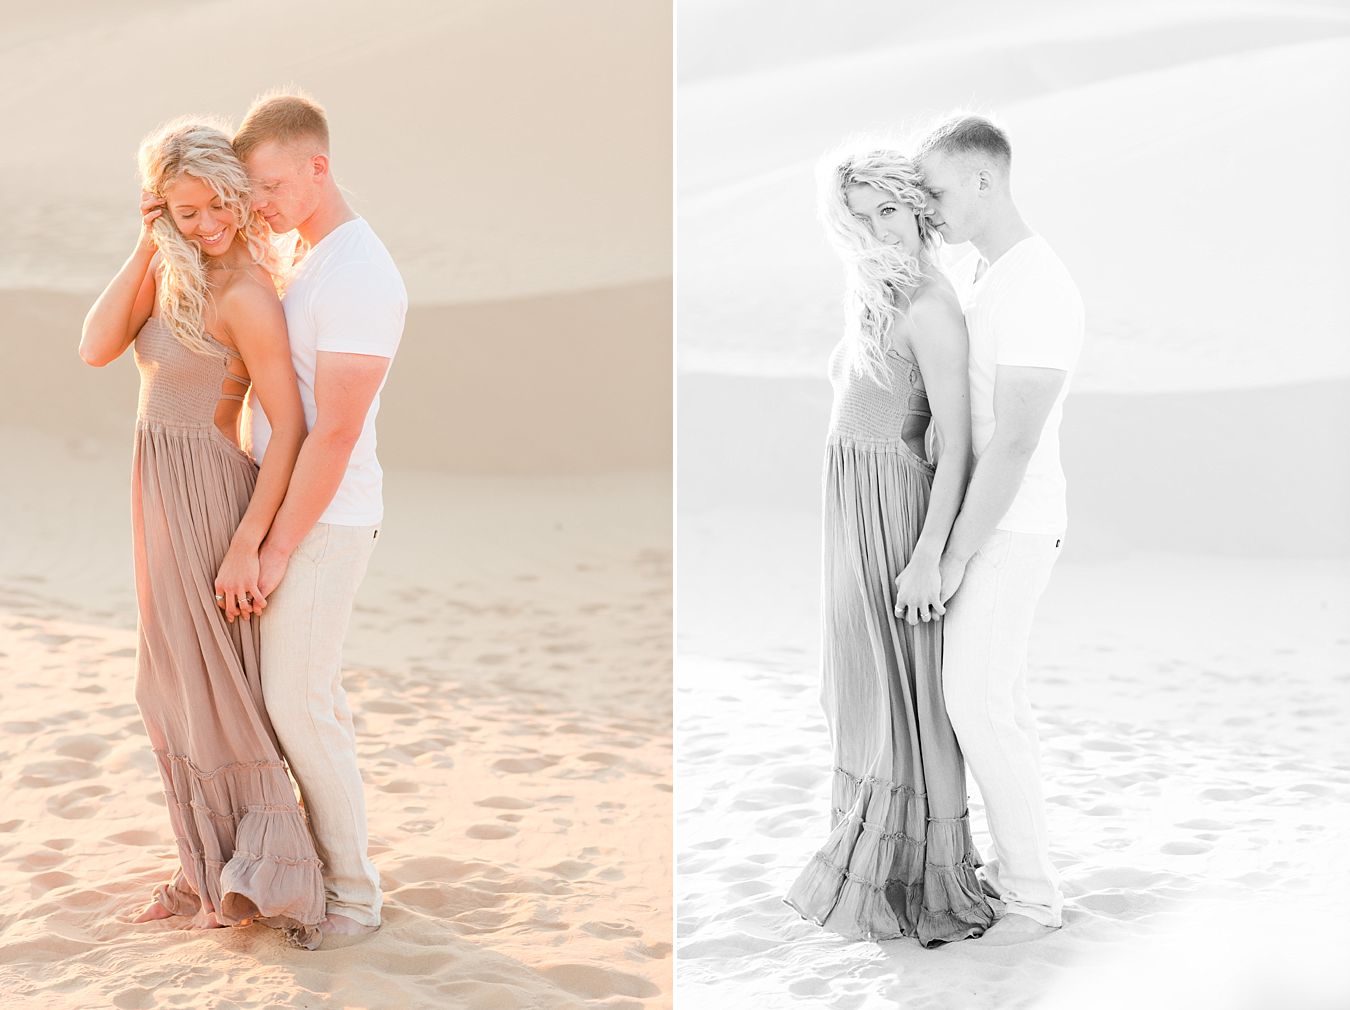 photo shoot at the sand dunes